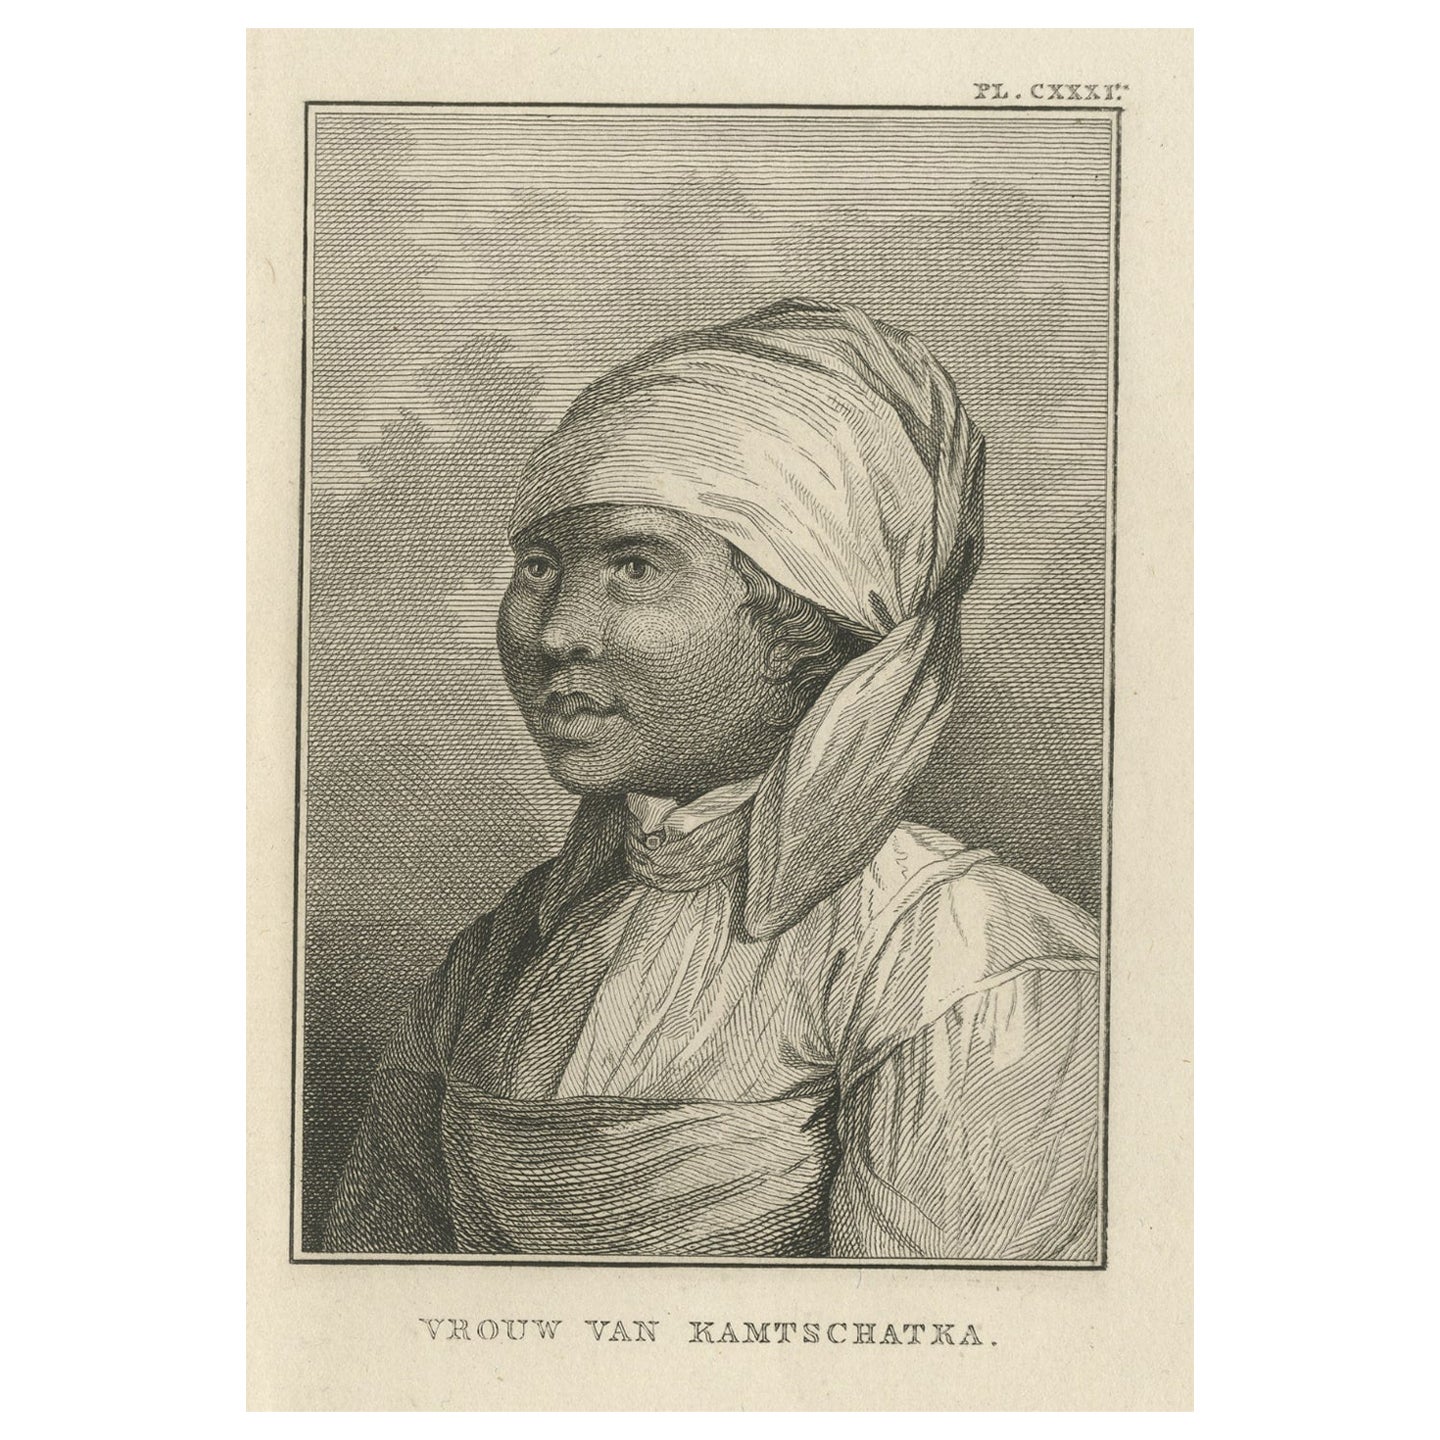 Antique Print of a Woman of Kamchatka, Russia by Cook, 1803